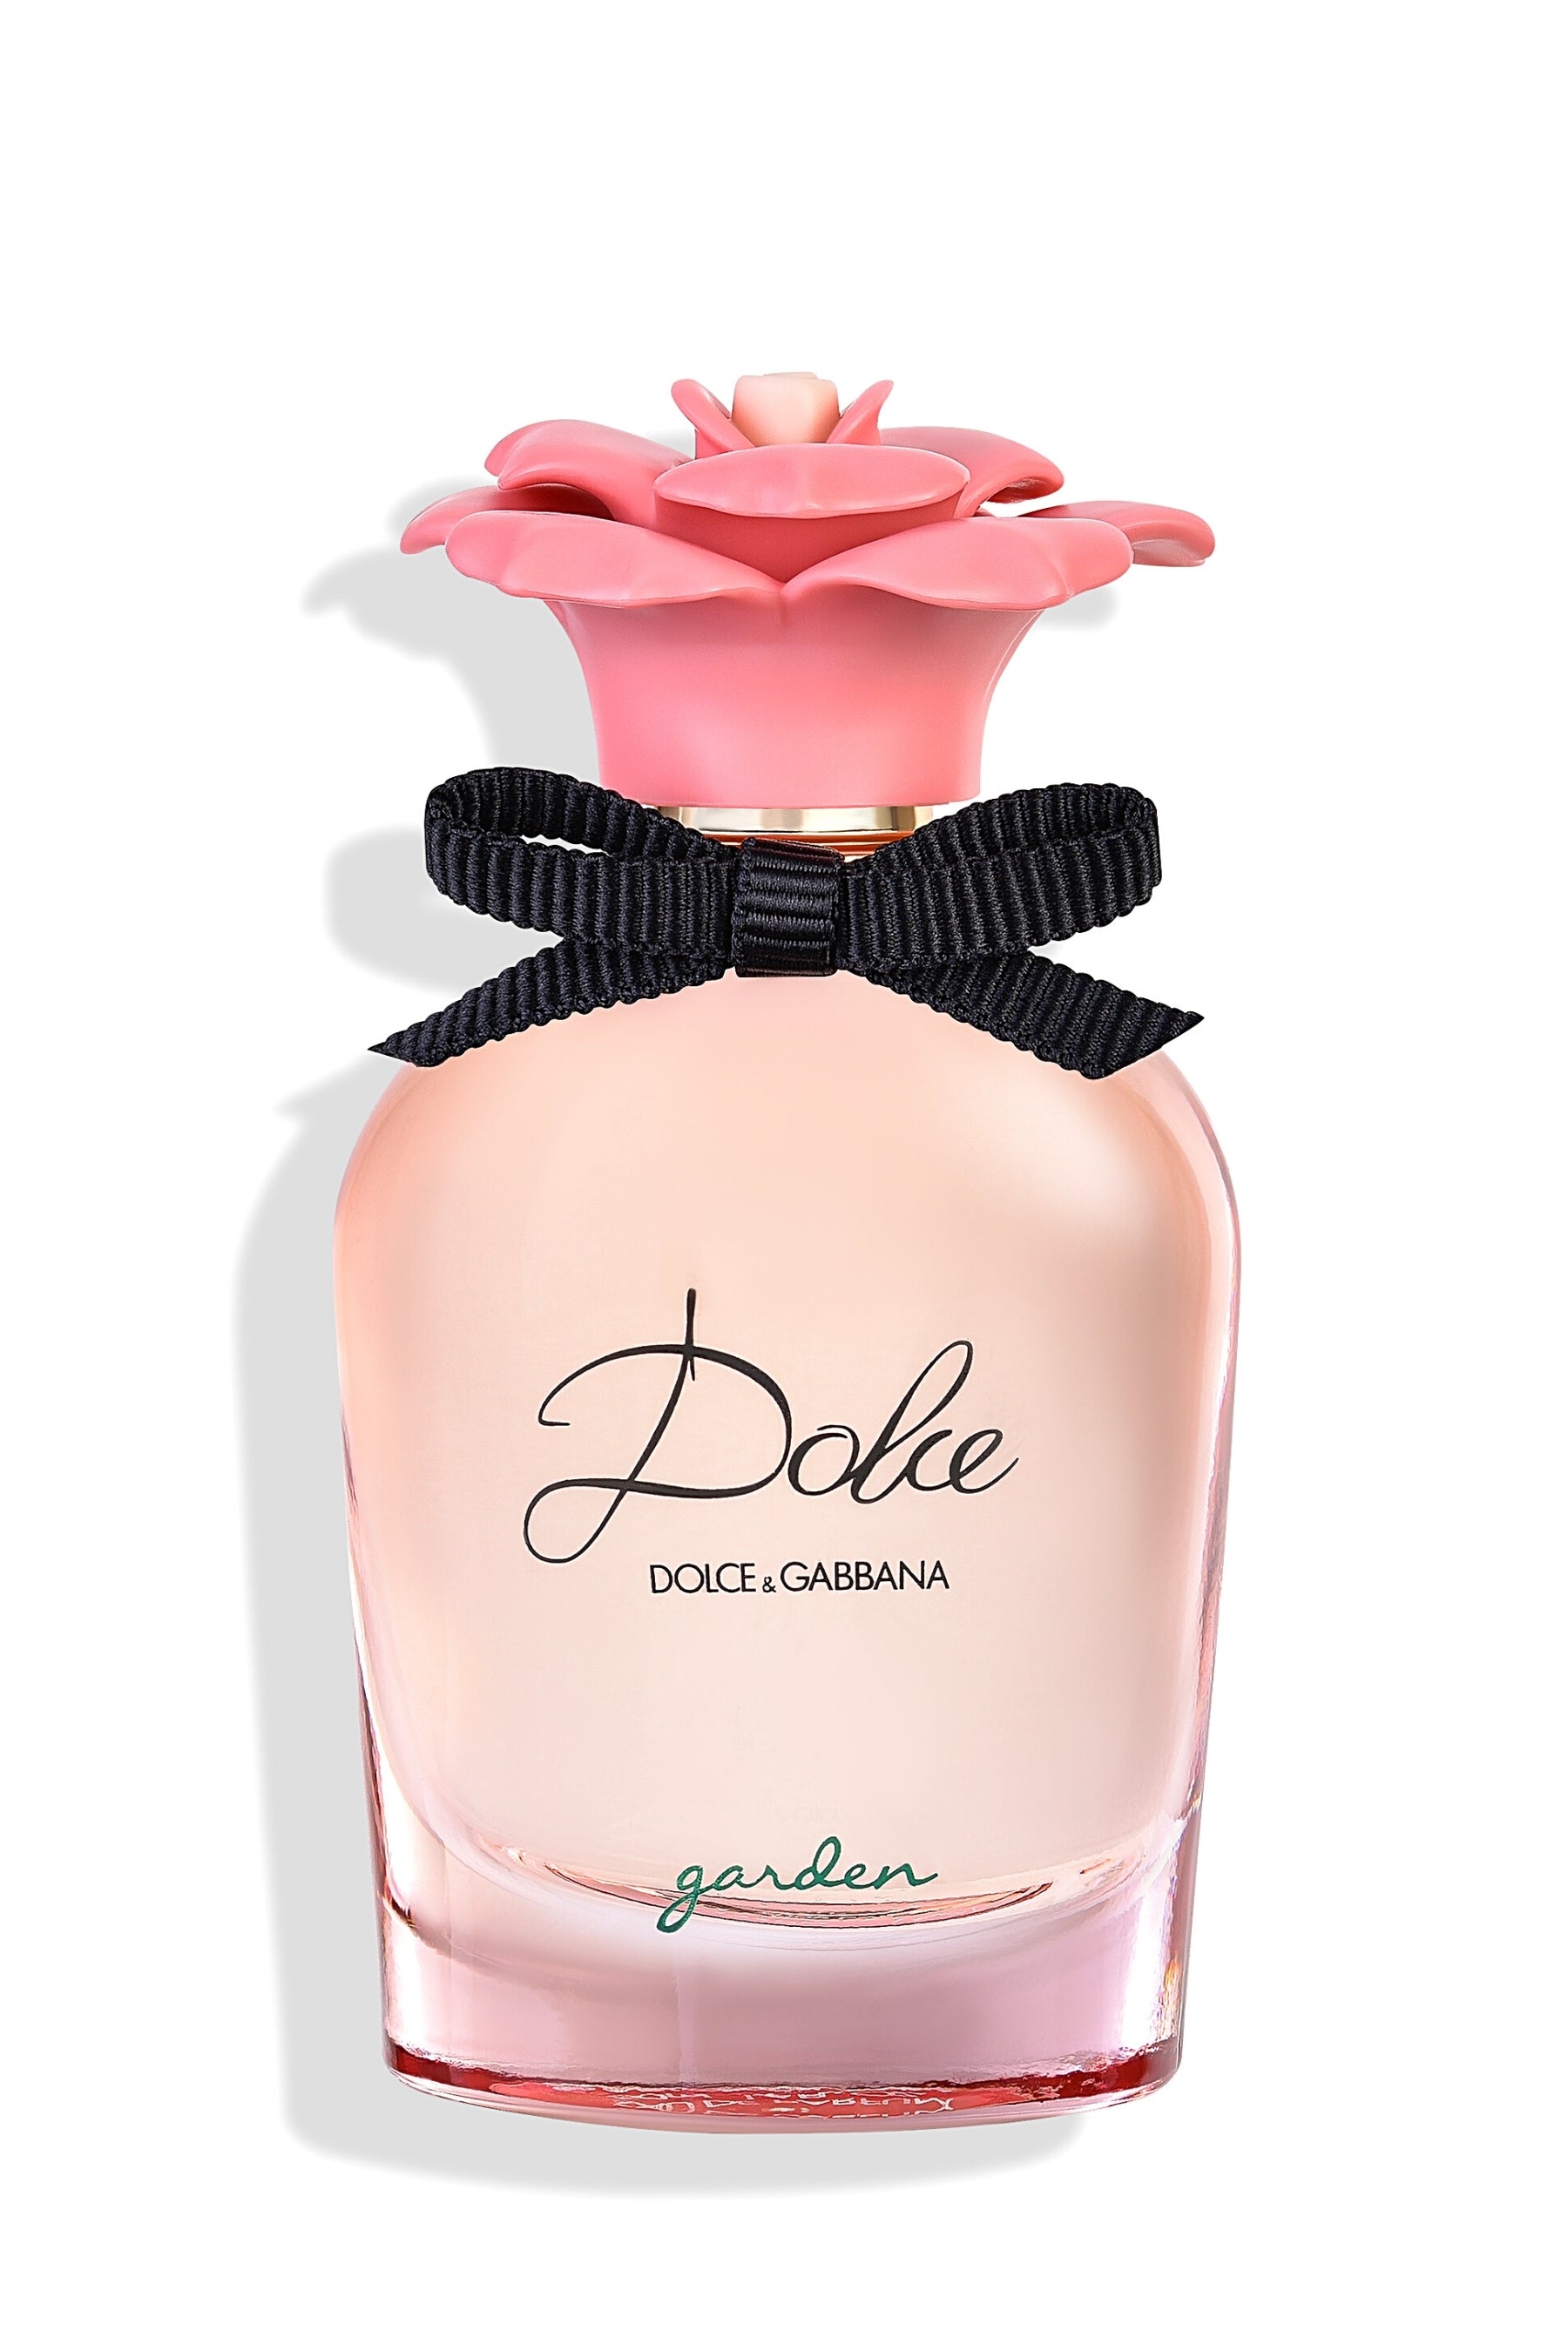 dolce and gabbana perfume pink bottle